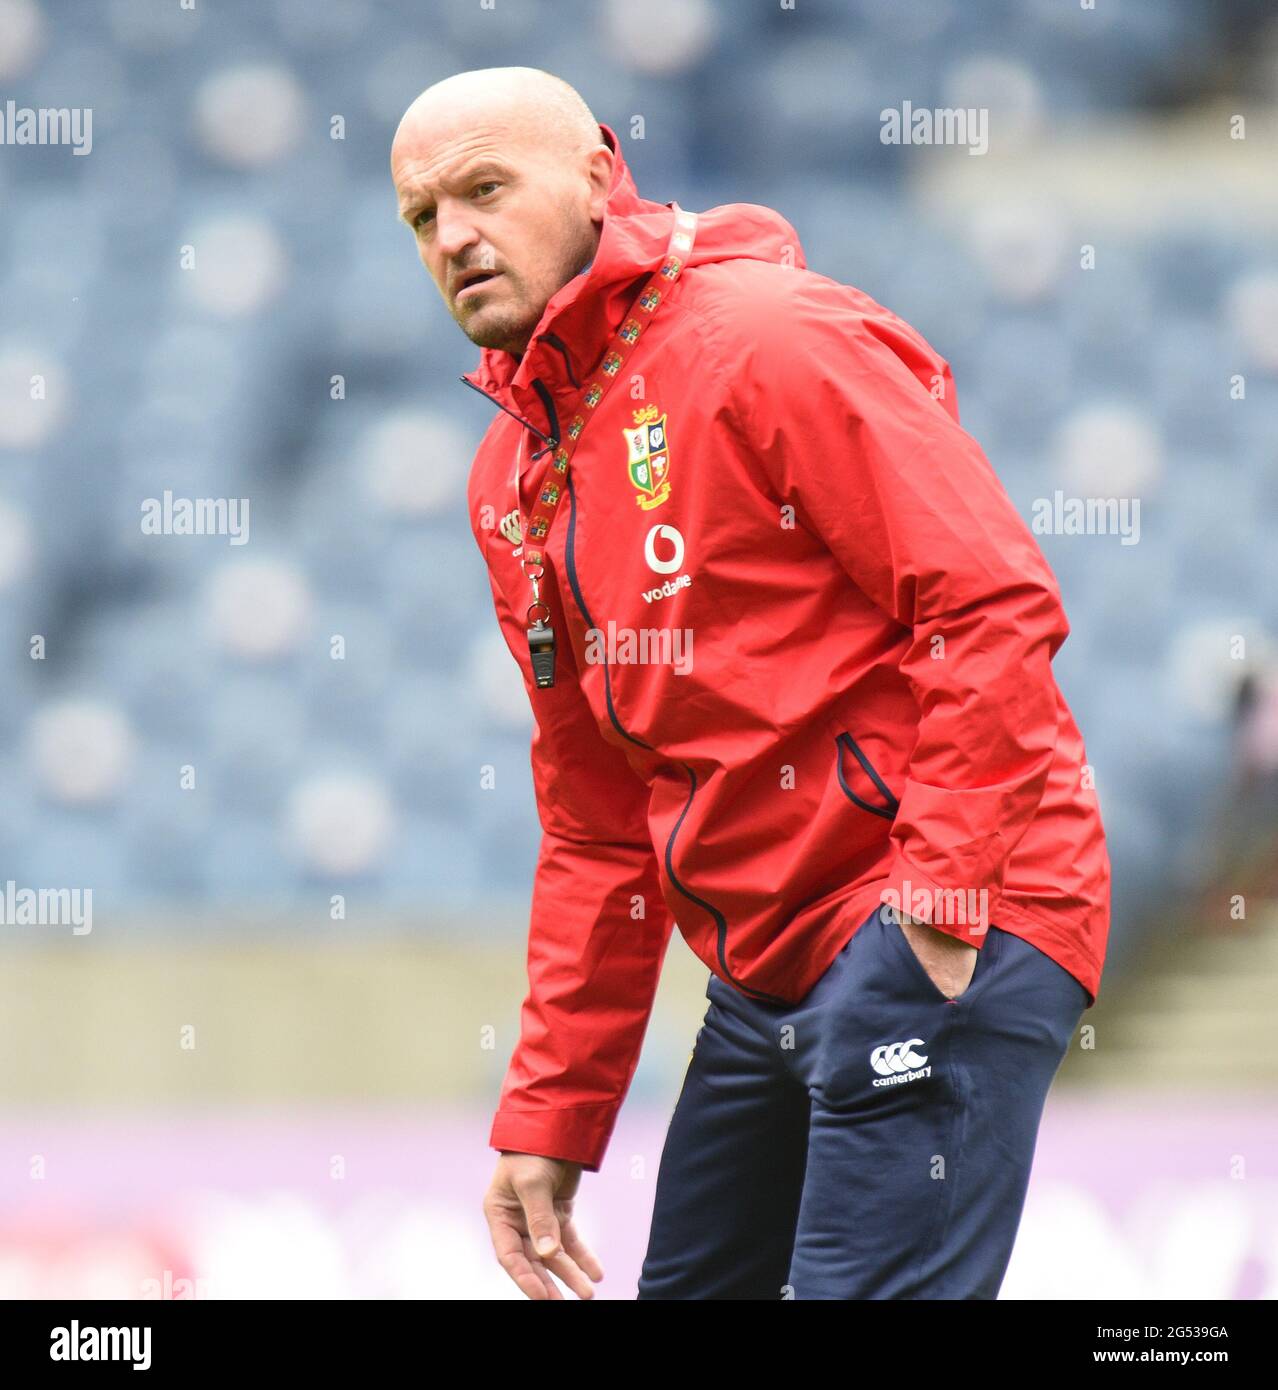 BT Murrayfield .Edinburgh.Scotland UK. 25th June-21 British & Irish Lions Training Session for Japan Match Attack Coach Gregor Townsend pictured during training session. Credit: eric mccowat/Alamy Live News Stock Photo